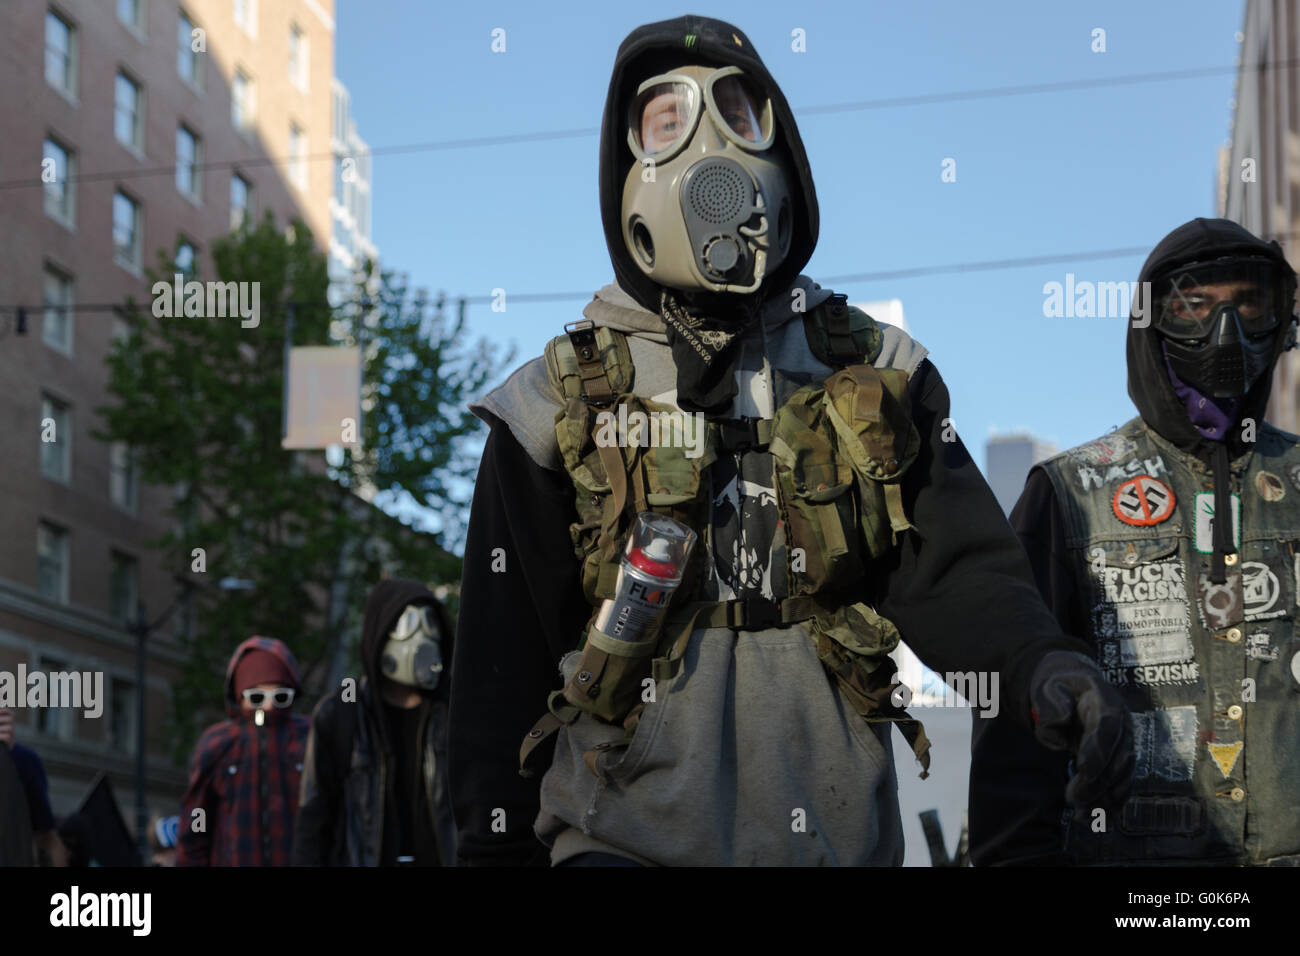 Seattle, WA, USA. 1st May, 2016. Anti-Capitalist/Police/Racism protesters march on the street with protective gear including gas masks. Stock Photo